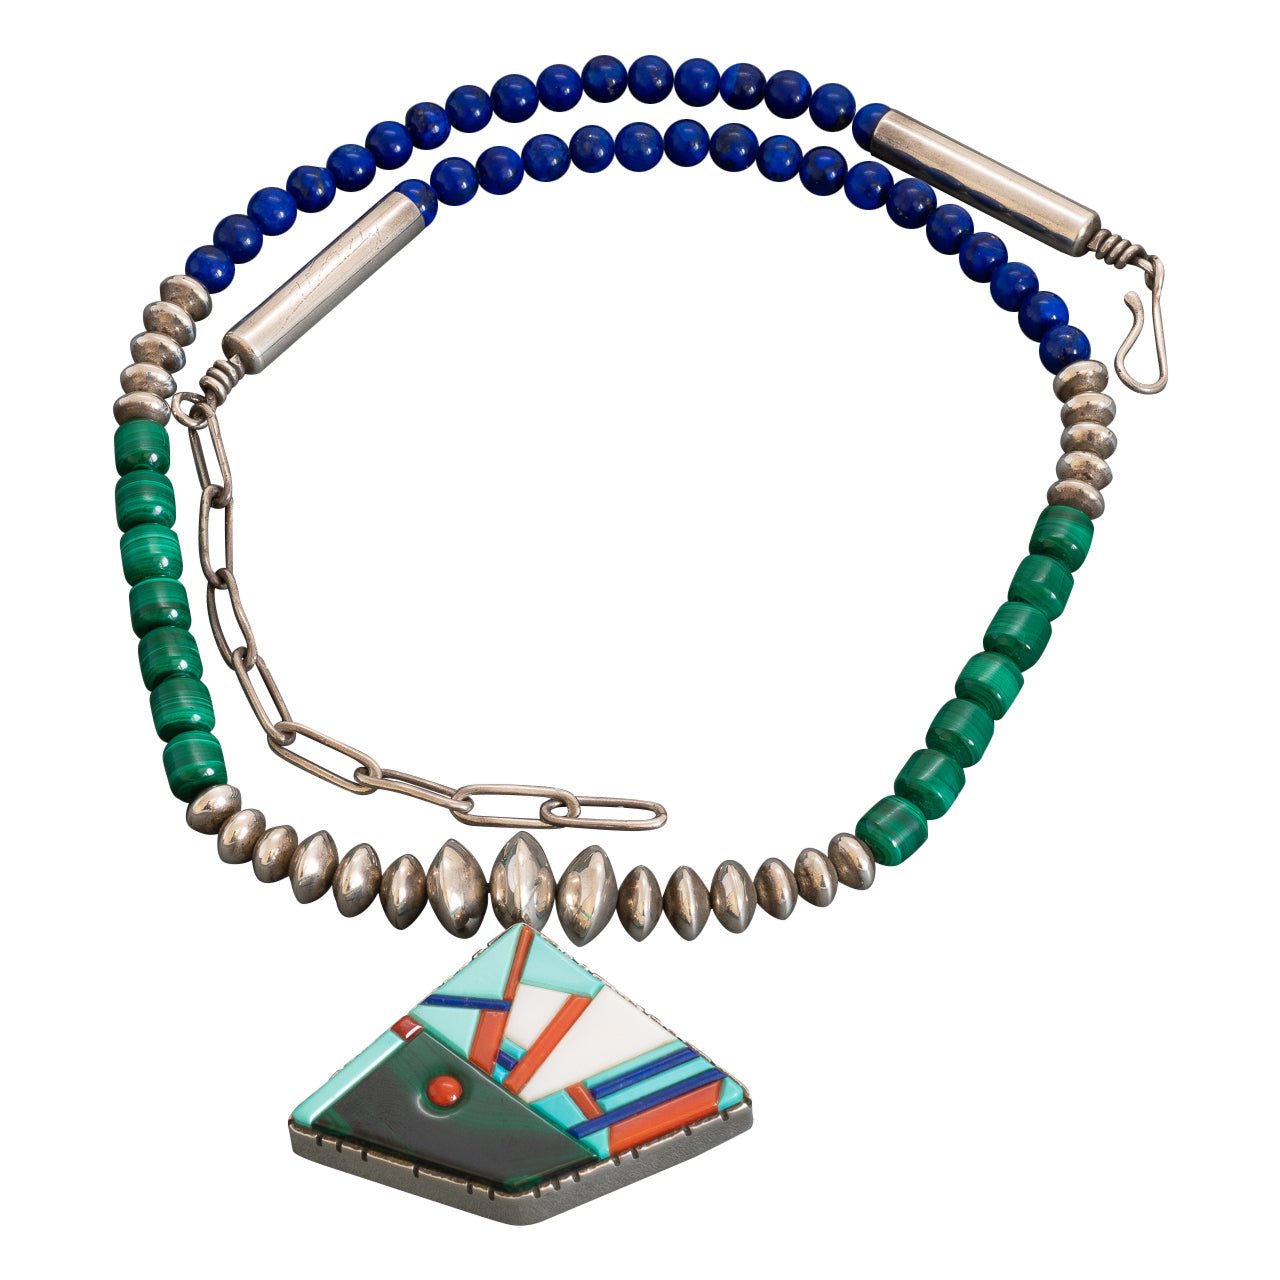 Beaded Necklace By Richard Tsosie With Dual Sided Inlay Pendant - Turquoise & Tufa